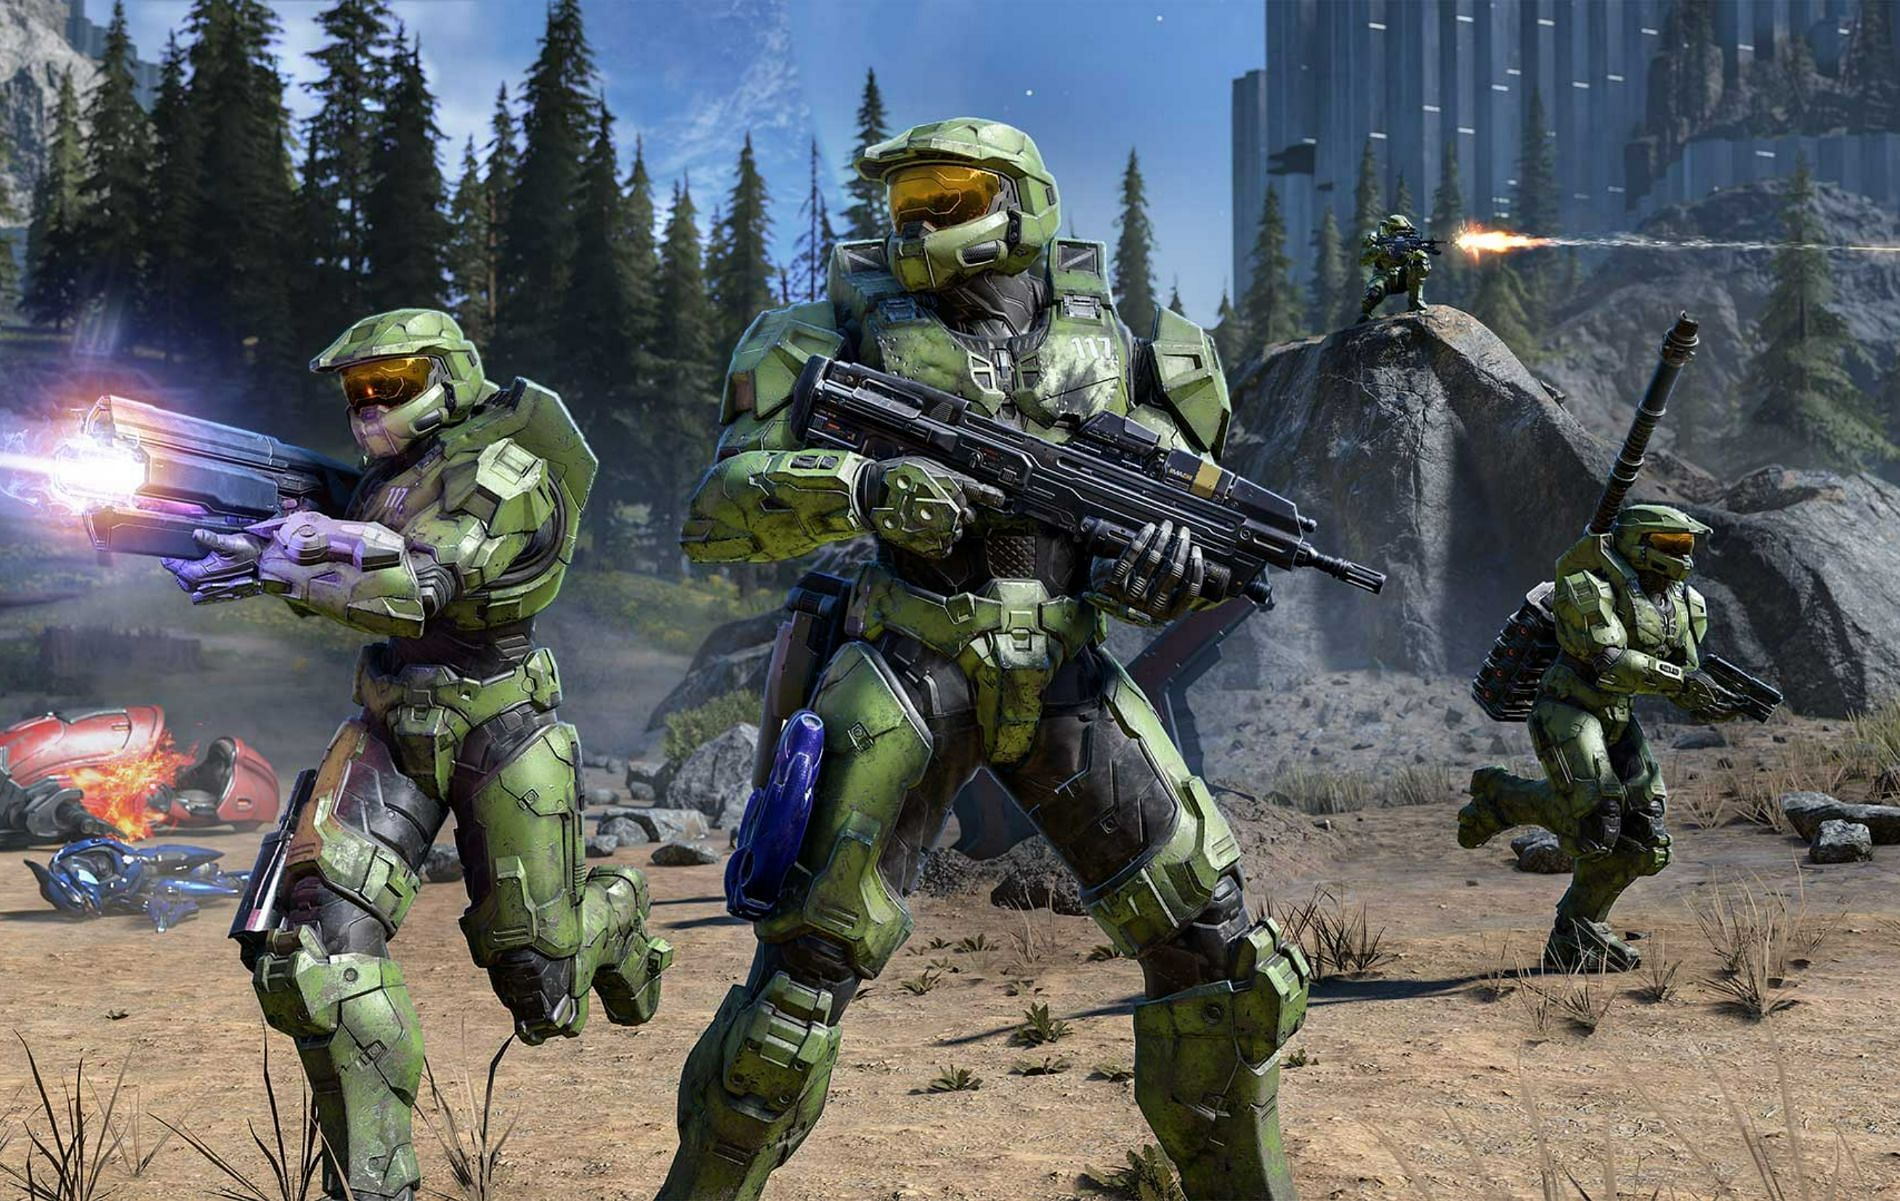 Playing Campaign Co-op in Halo Infinite (Image via Halo Infinite)